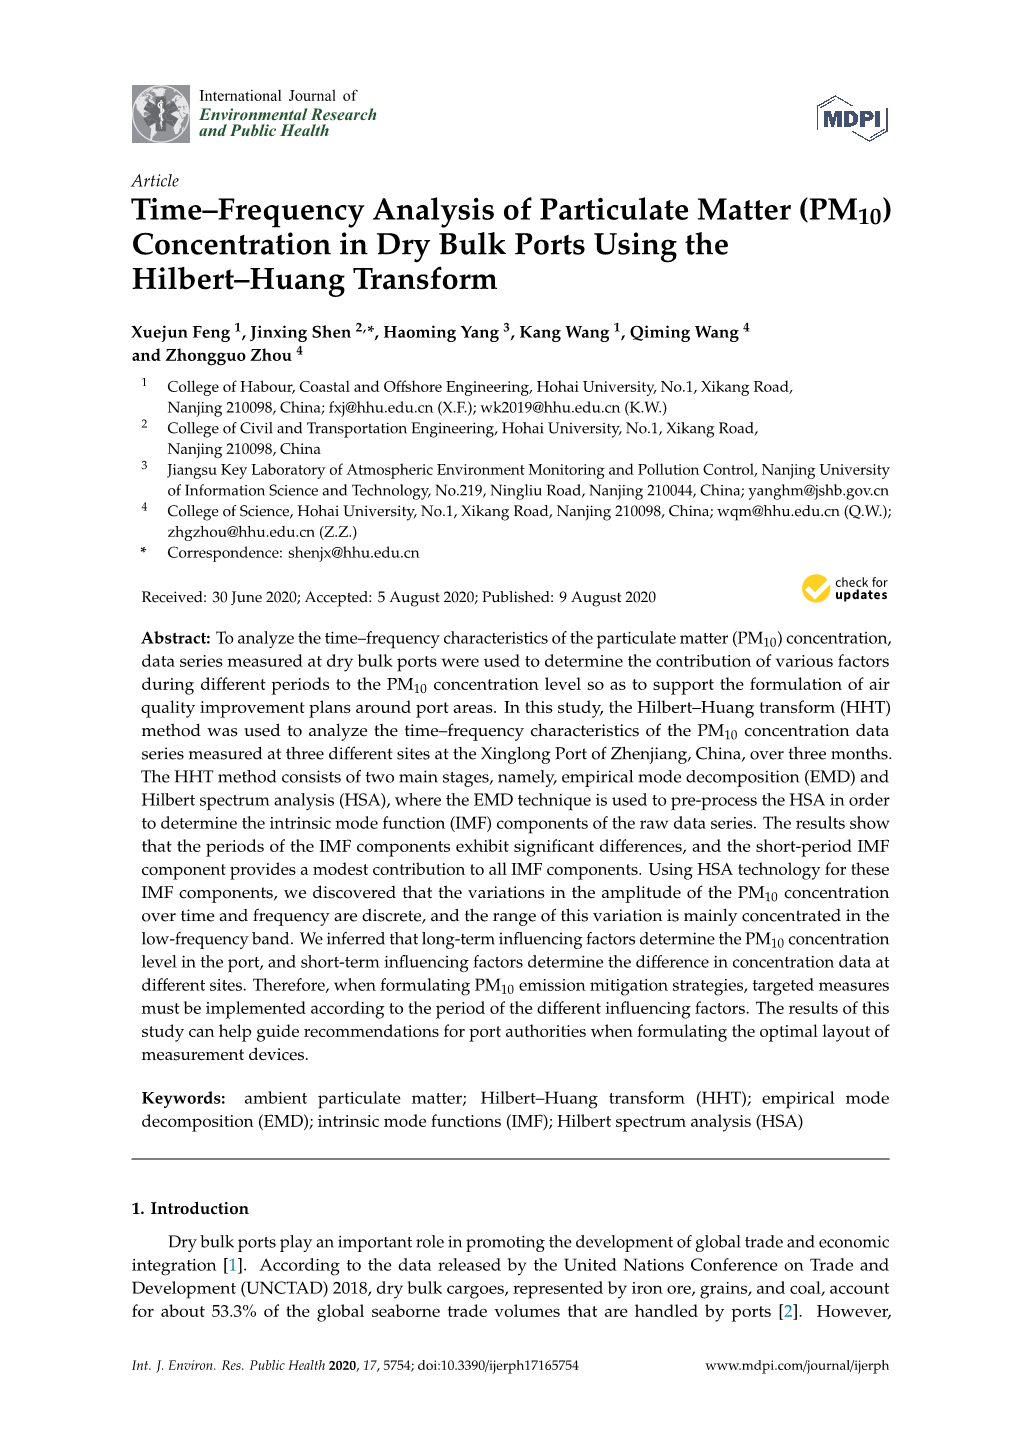 Time–Frequency Analysis of Particulate Matter (PM10) Concentration in Dry Bulk Ports Using the Hilbert–Huang Transform